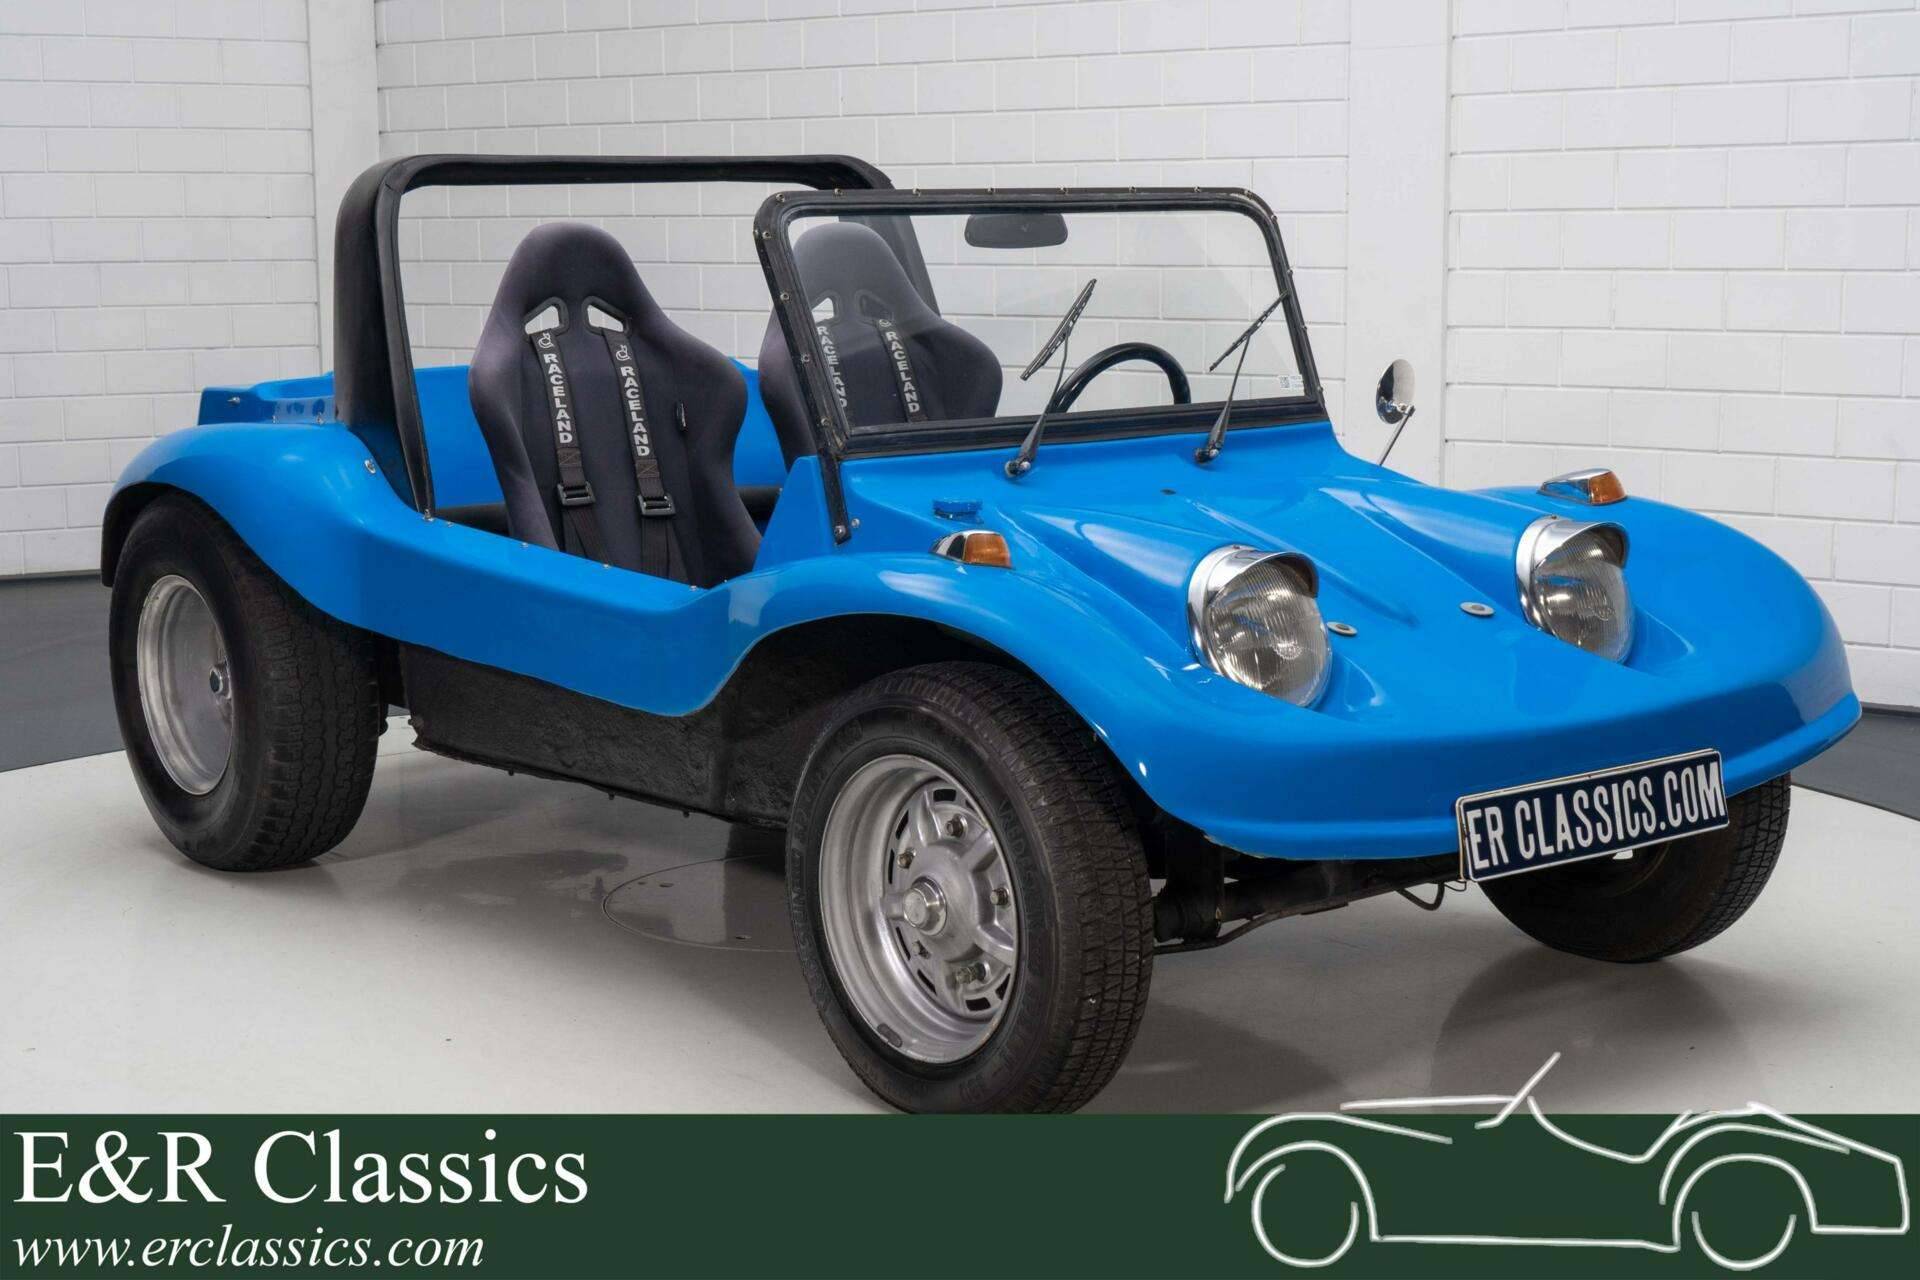  VW Classifieds - VW Brush Buggy